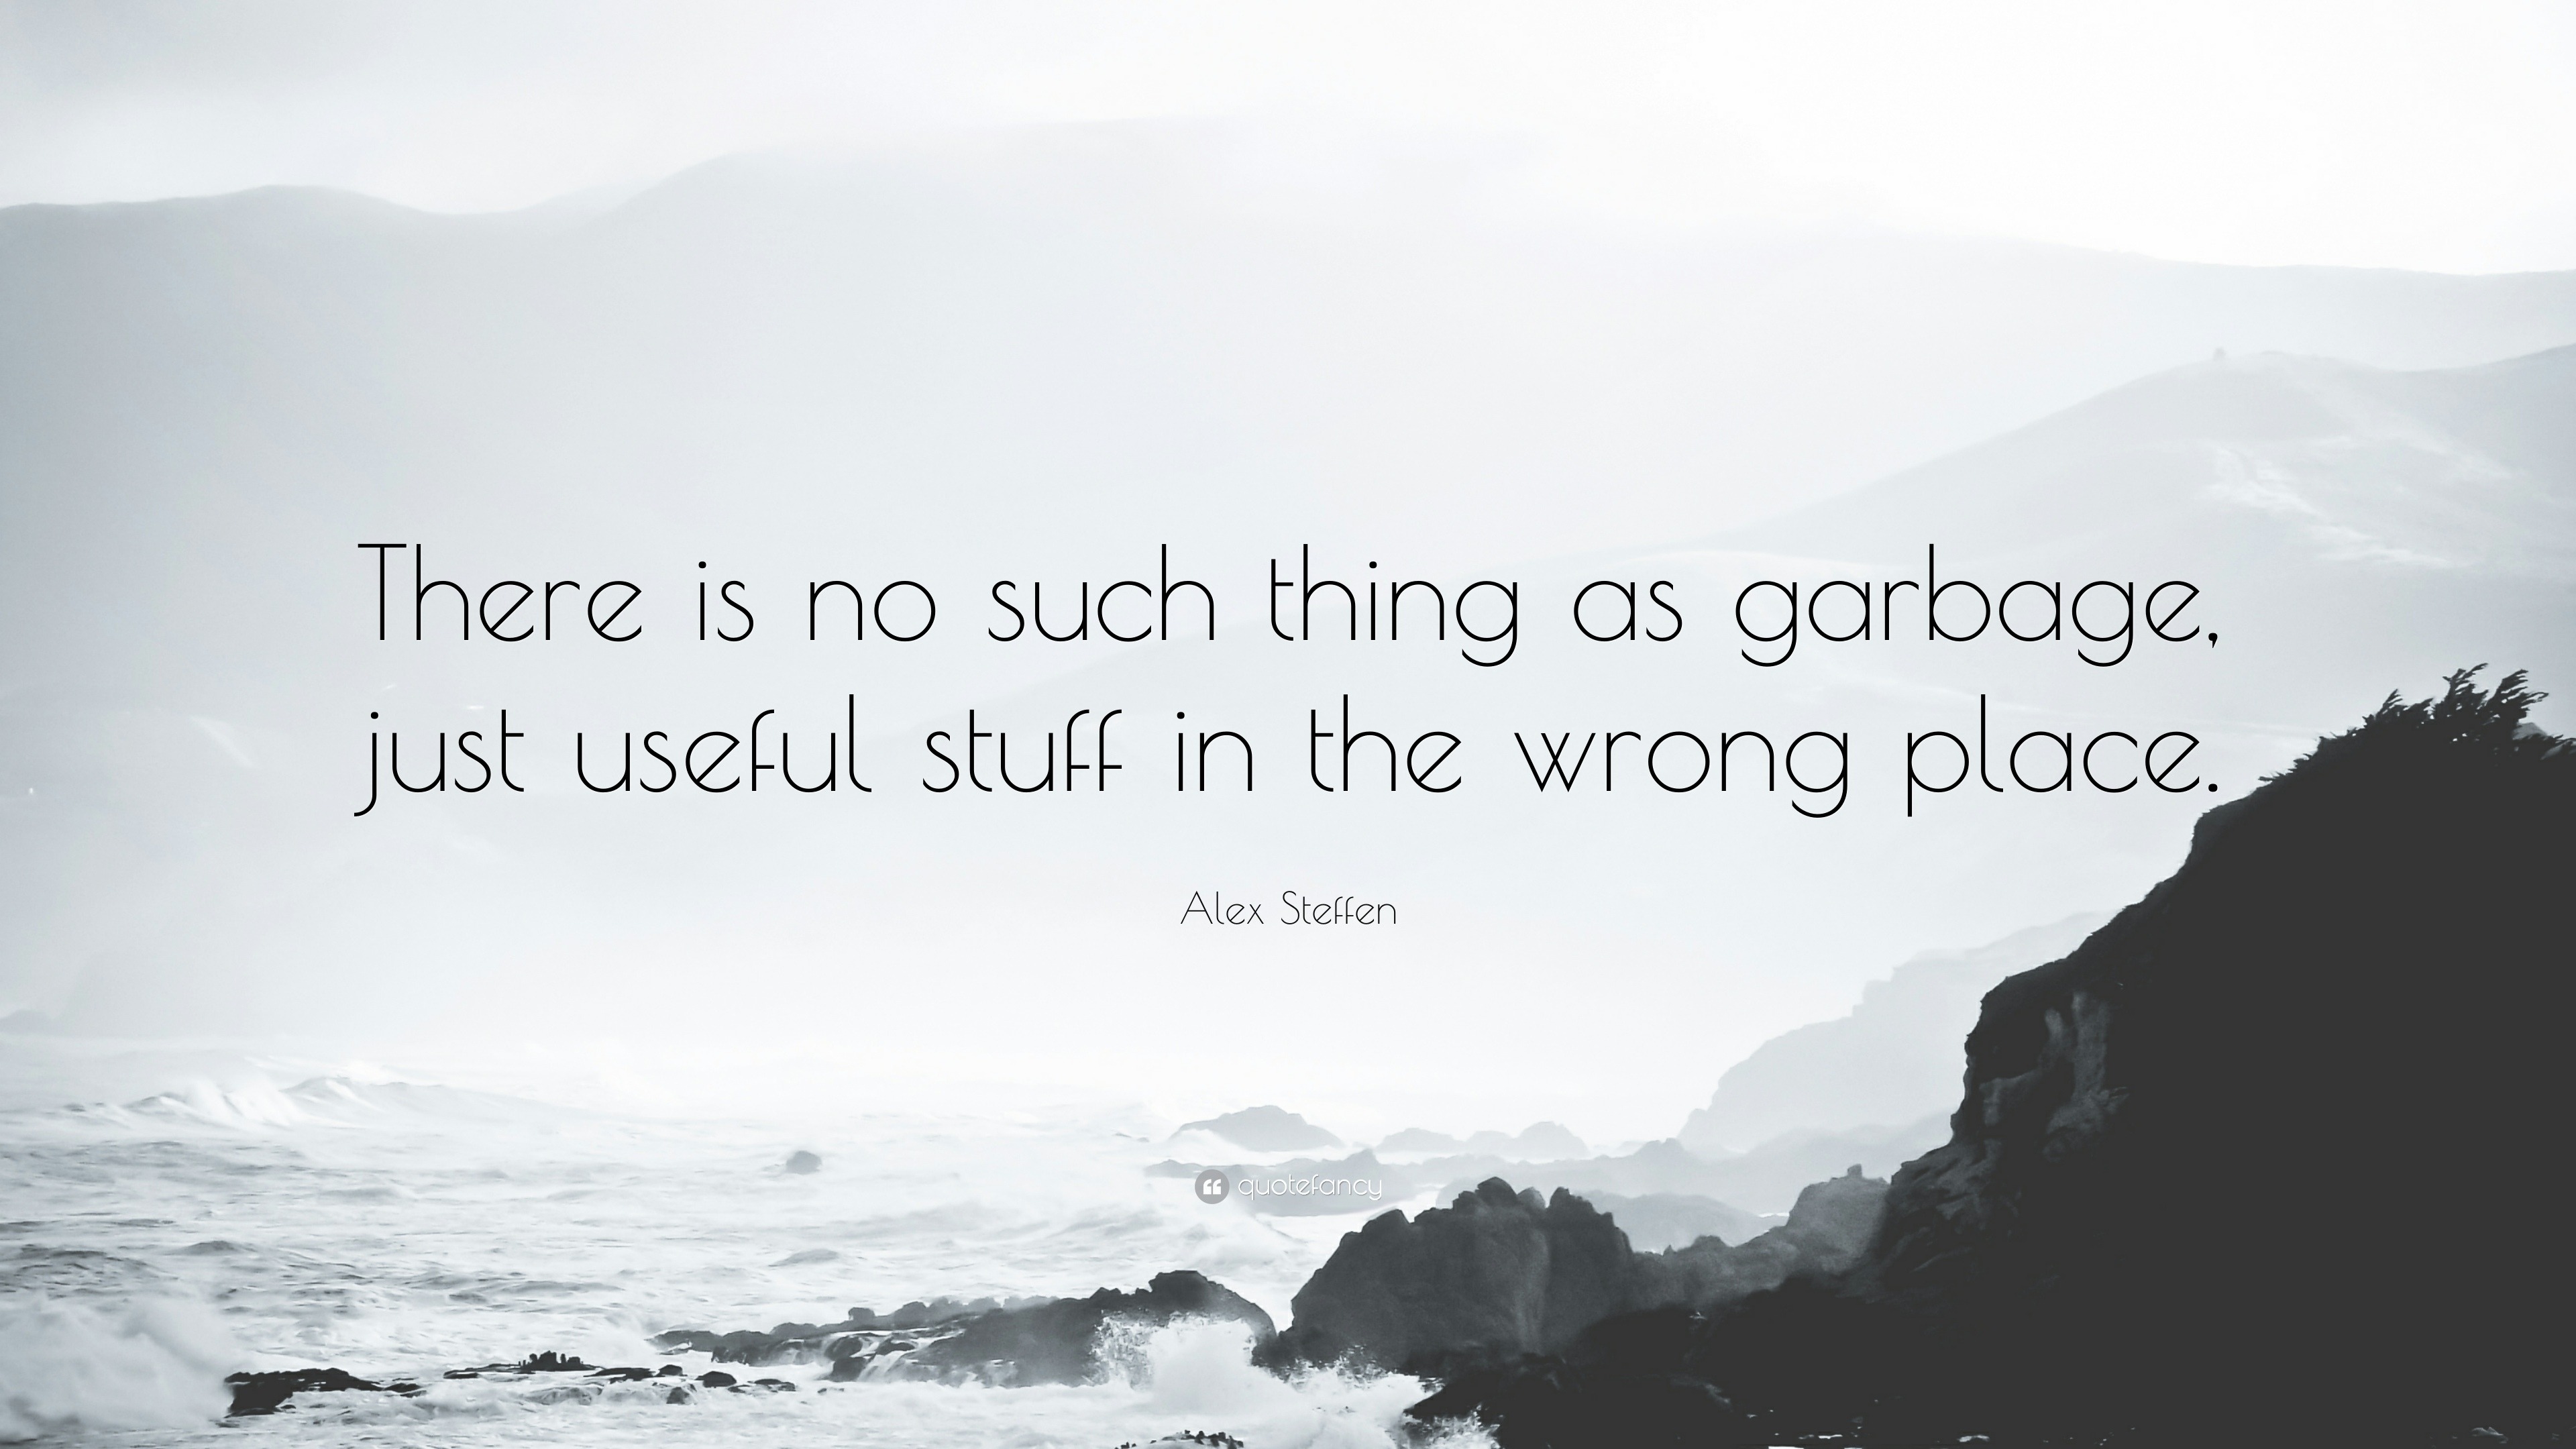 https://quotefancy.com/media/wallpaper/3840x2160/1105078-Alex-Steffen-Quote-There-is-no-such-thing-as-garbage-just-useful.jpg